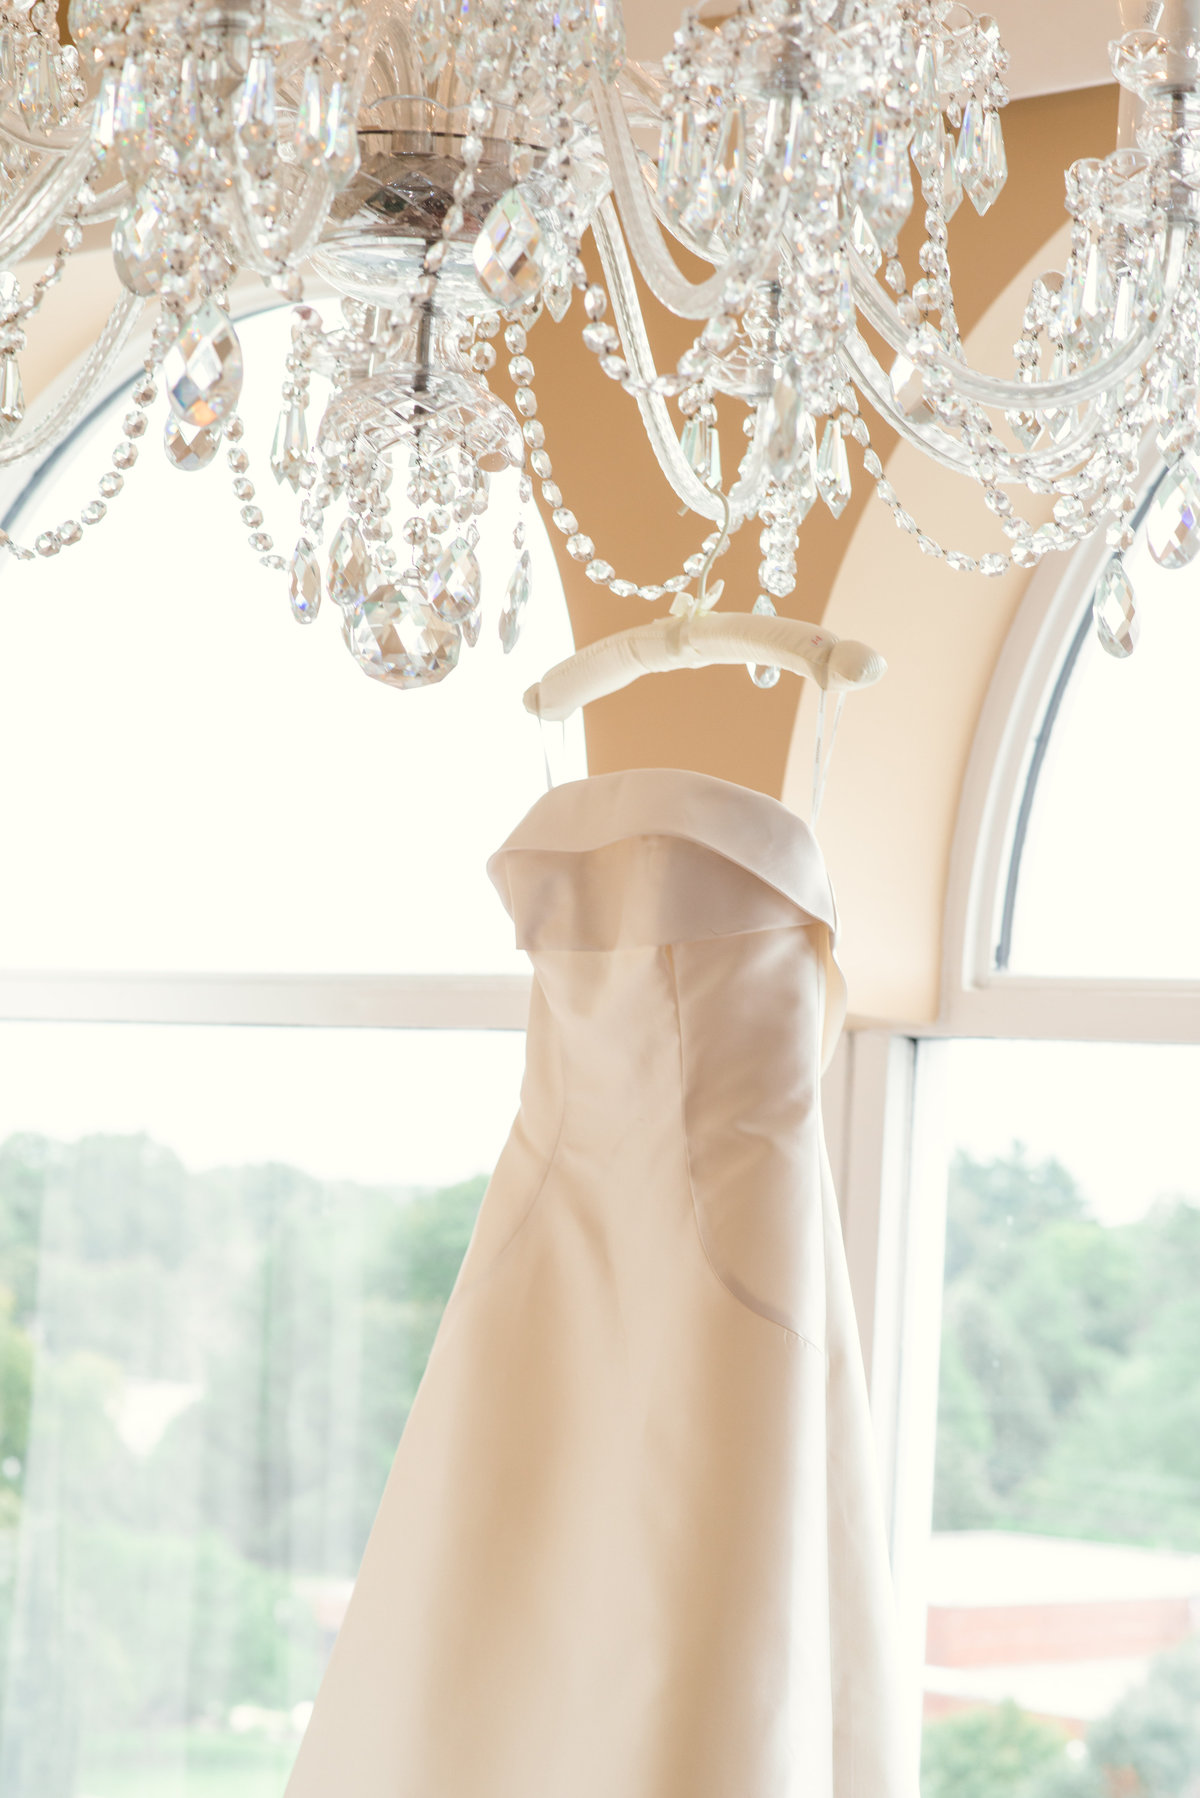 photo of bridal gown hanging on chandelier from inside The Garden City Hotel